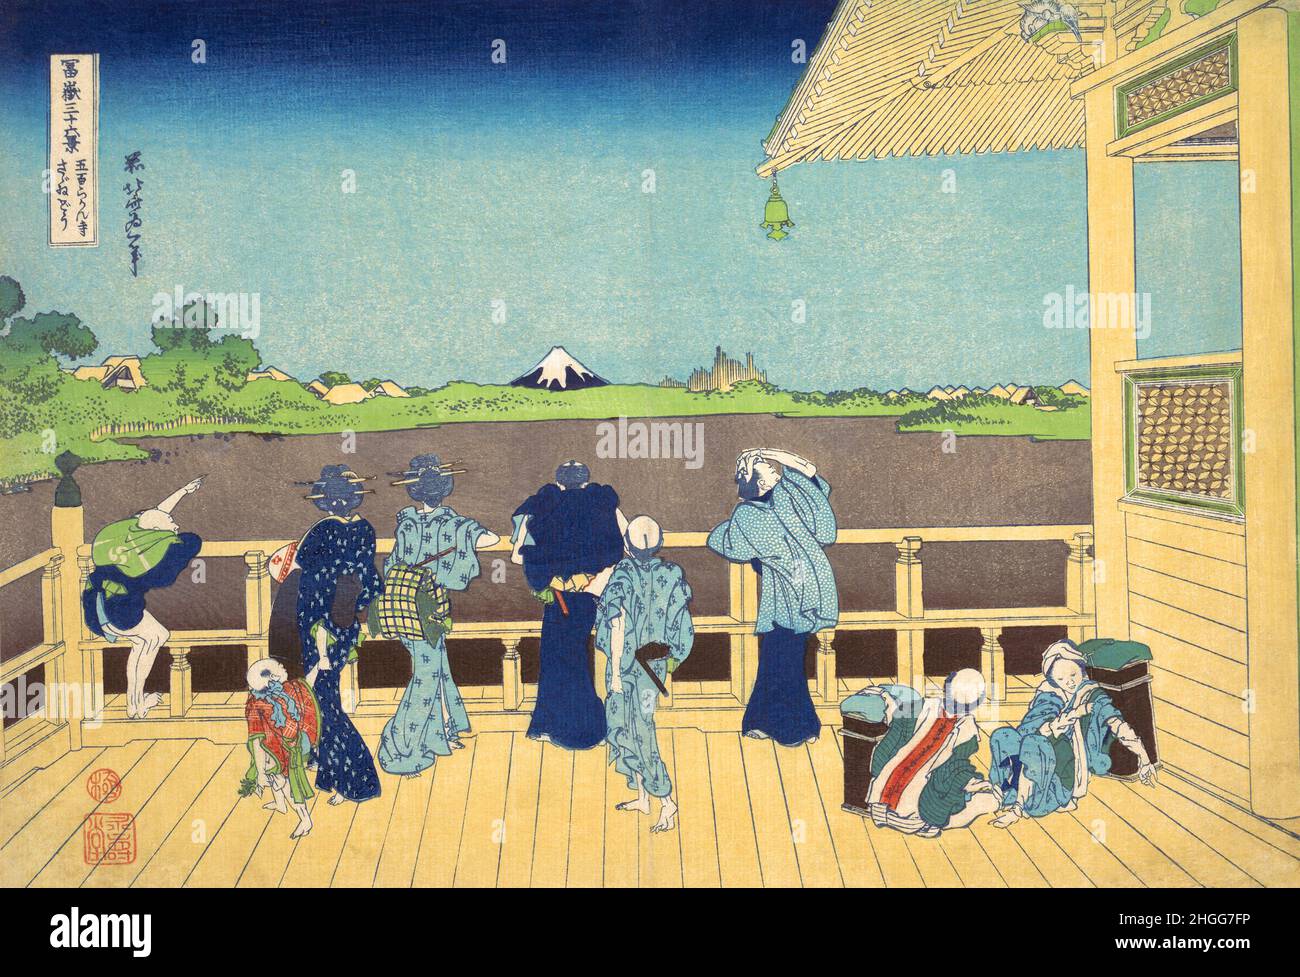 Japan: ‘Sazai Hall - Temple of Five Hundred Rakan’. Ukiyo-e woodblock print from the series ‘Thirty-Six Views of Mount Fuji’ by Katsushika Hokusai (31 October 1760 - 10 May 1849), 1830.  ‘Thirty-six Views of Mount Fuji’ is an ‘ukiyo-e’ series of woodcut prints by Japanese artist Katsushika Hokusai. The series depicts Mount Fuji in differing seasons and weather conditions from a variety of places and distances. It actually consists of 46 prints created between 1826 and 1833. The first 36 were included in the original publication and, due to their popularity, 10 more were added. Stock Photo